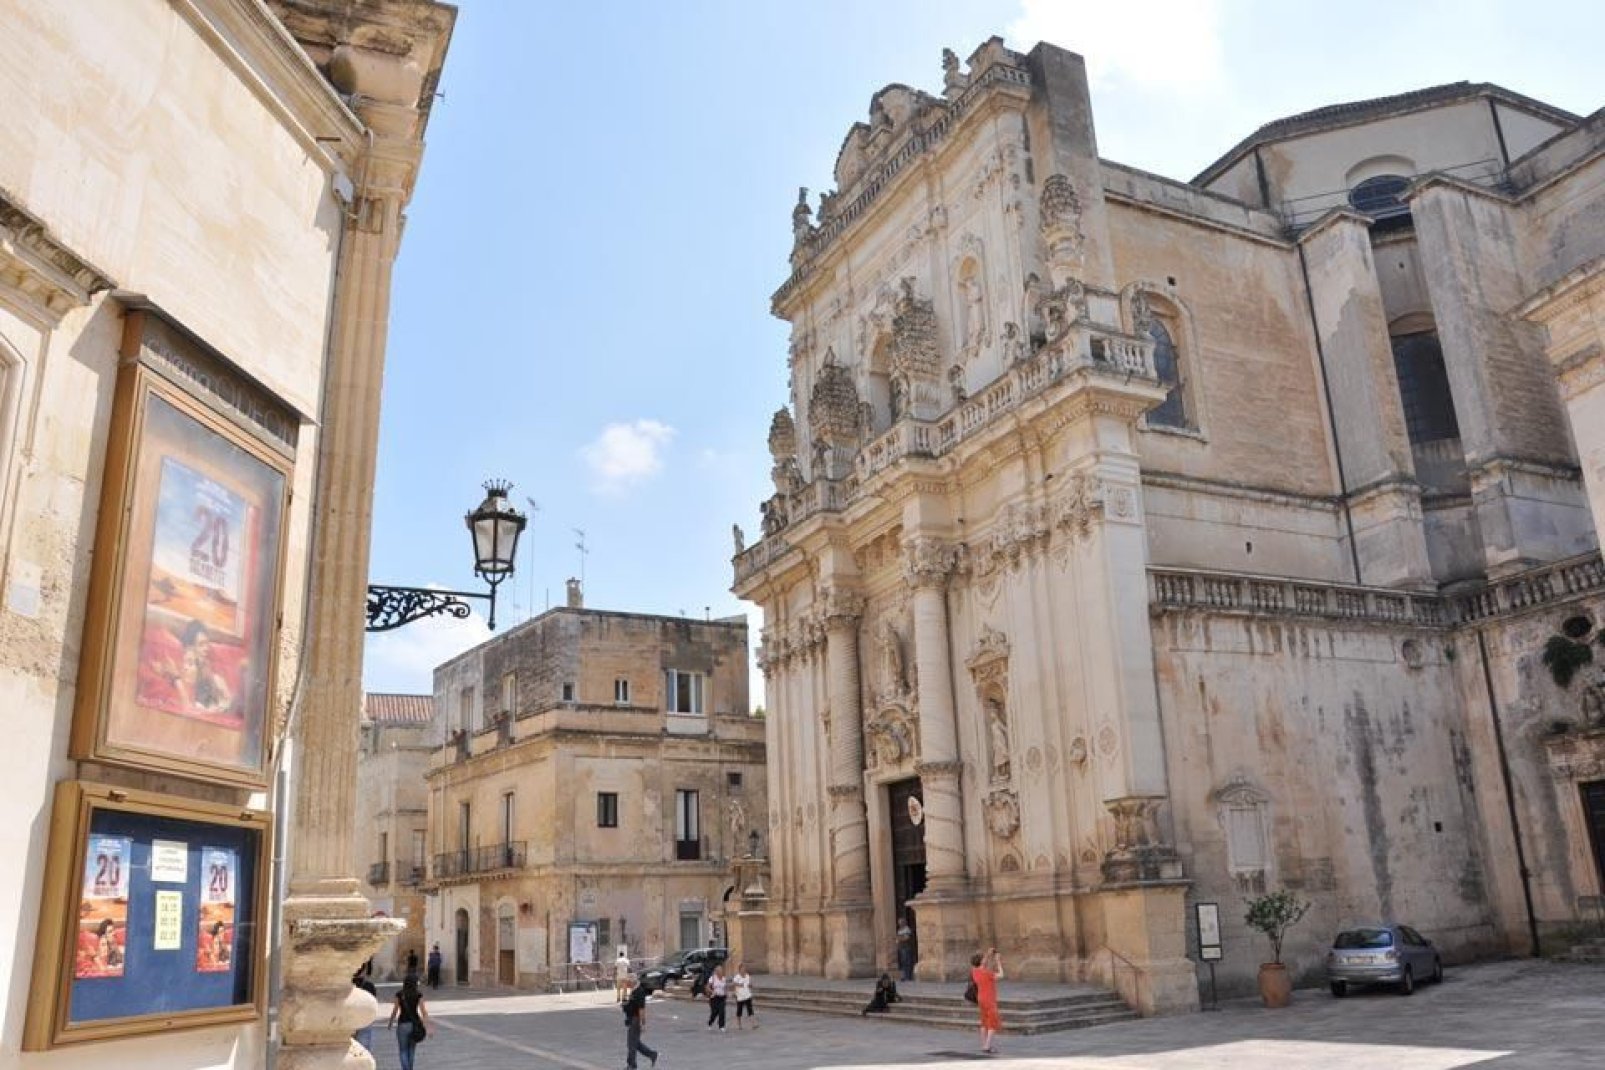 The Cathedral of Lecce is located on the square of the same name. Nearby, the baroque-style Bishop's Palace and Seminary